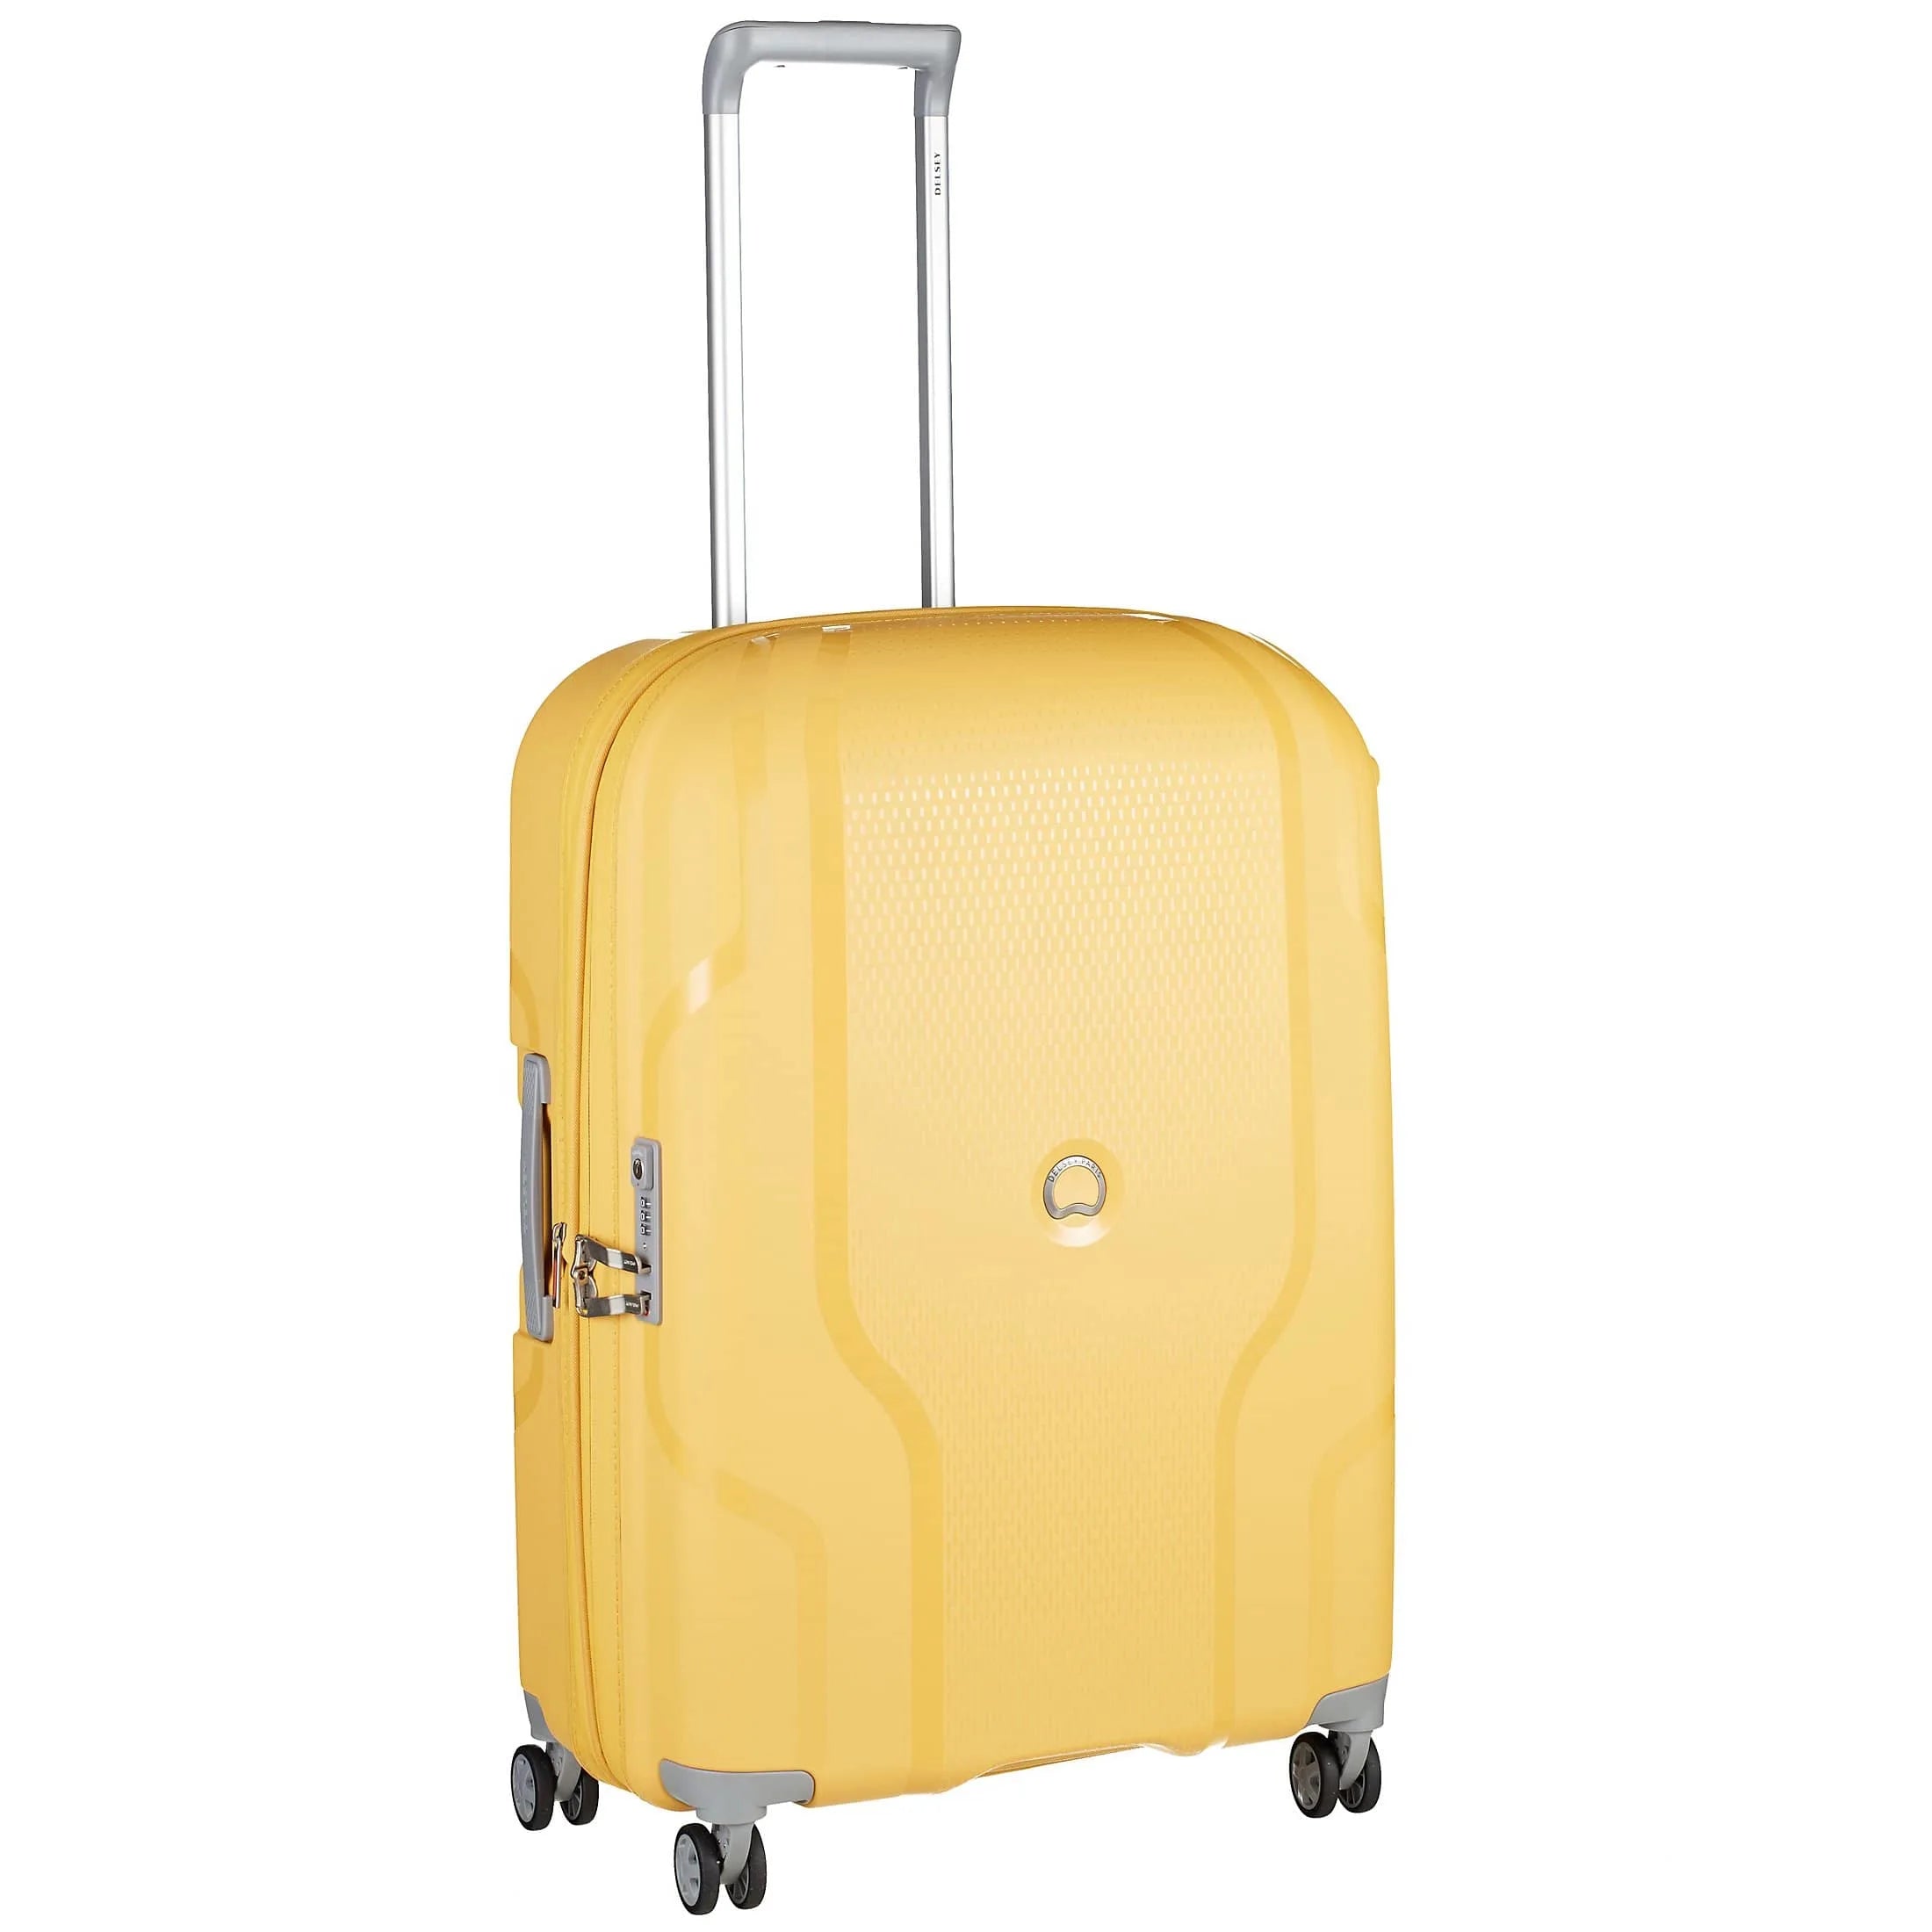 Delsey Clavel trolley 4 roues 70 cm - jaune